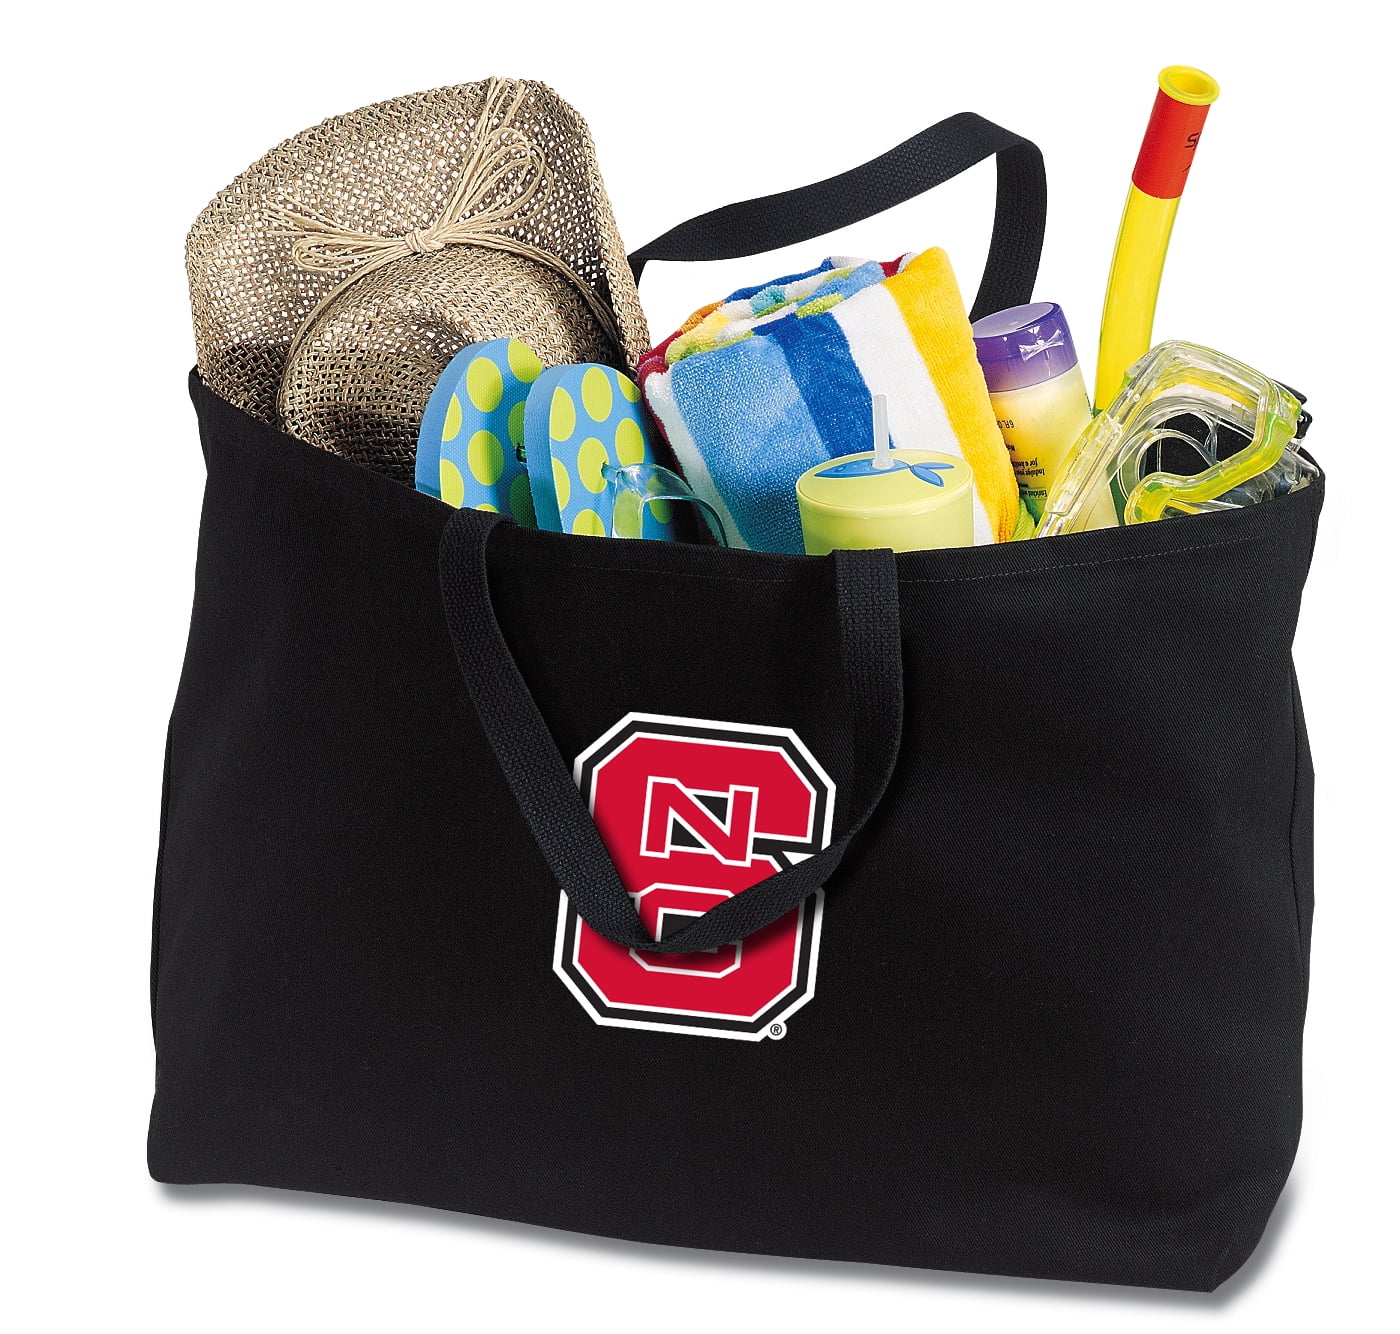 NC State Tote Bag Best Sling Style Across Body Bags 